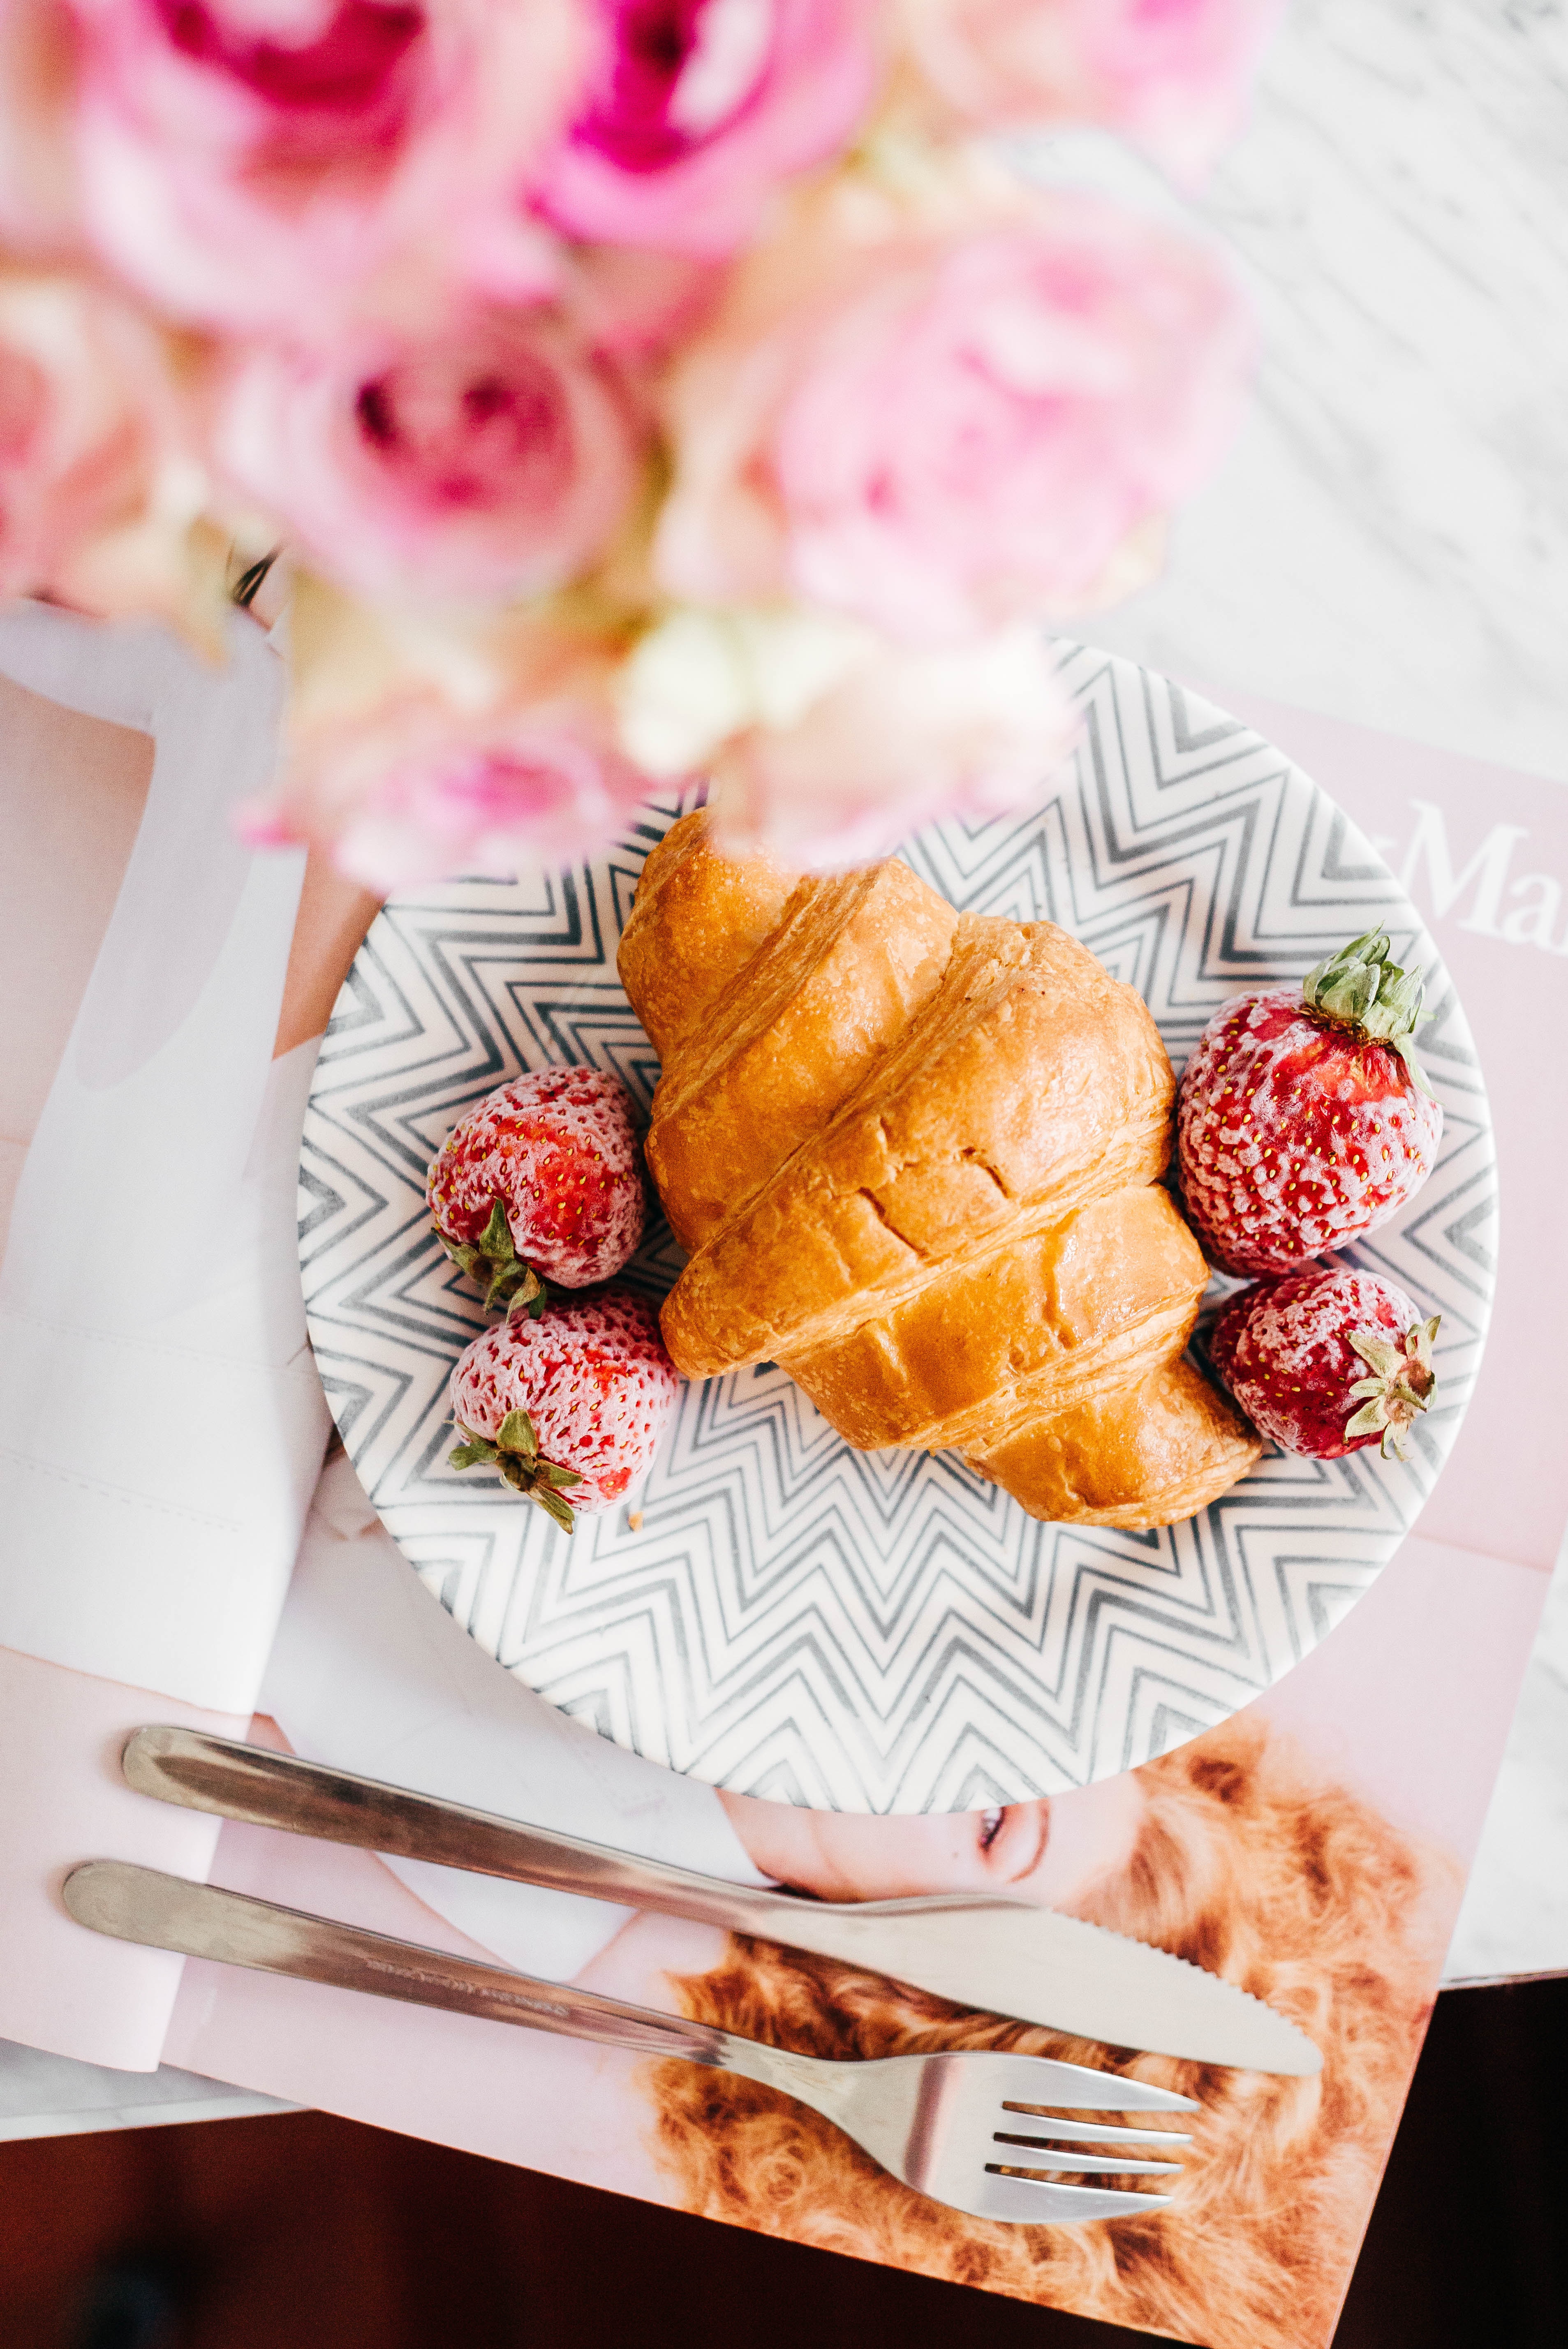 Croissant, perfect with fresh fruits and coffee